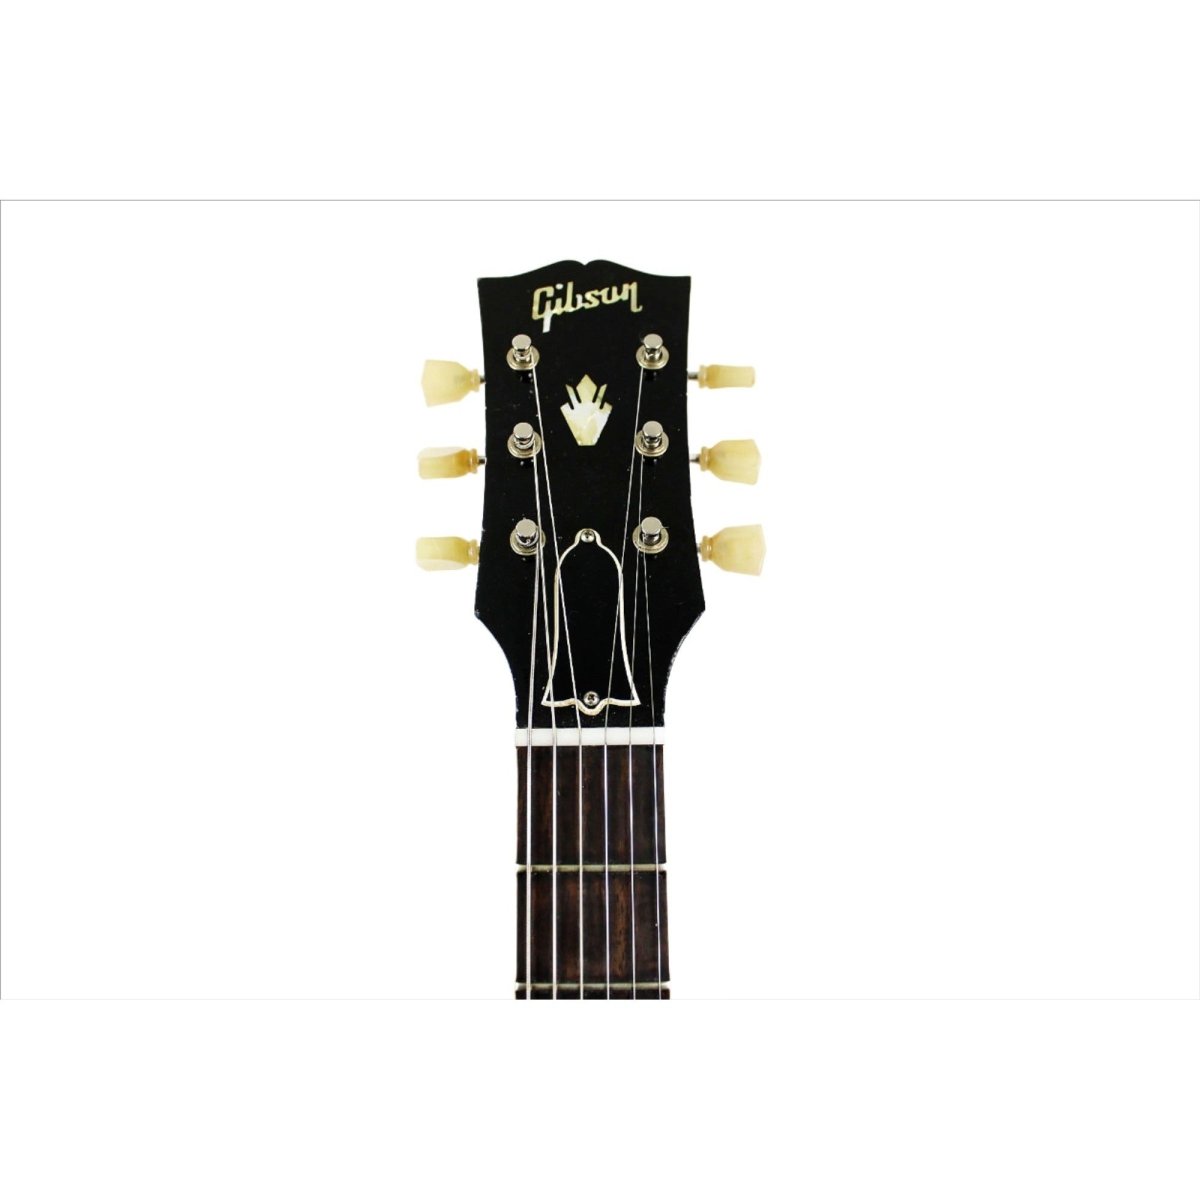 2018 Gibson Memphis Custom Shop 1959 ES-335 Historic Reissue - Aged Vintage Sunburst | Owned By Guthrie Trapp *USED-MINT* - Leitz Music--A09863